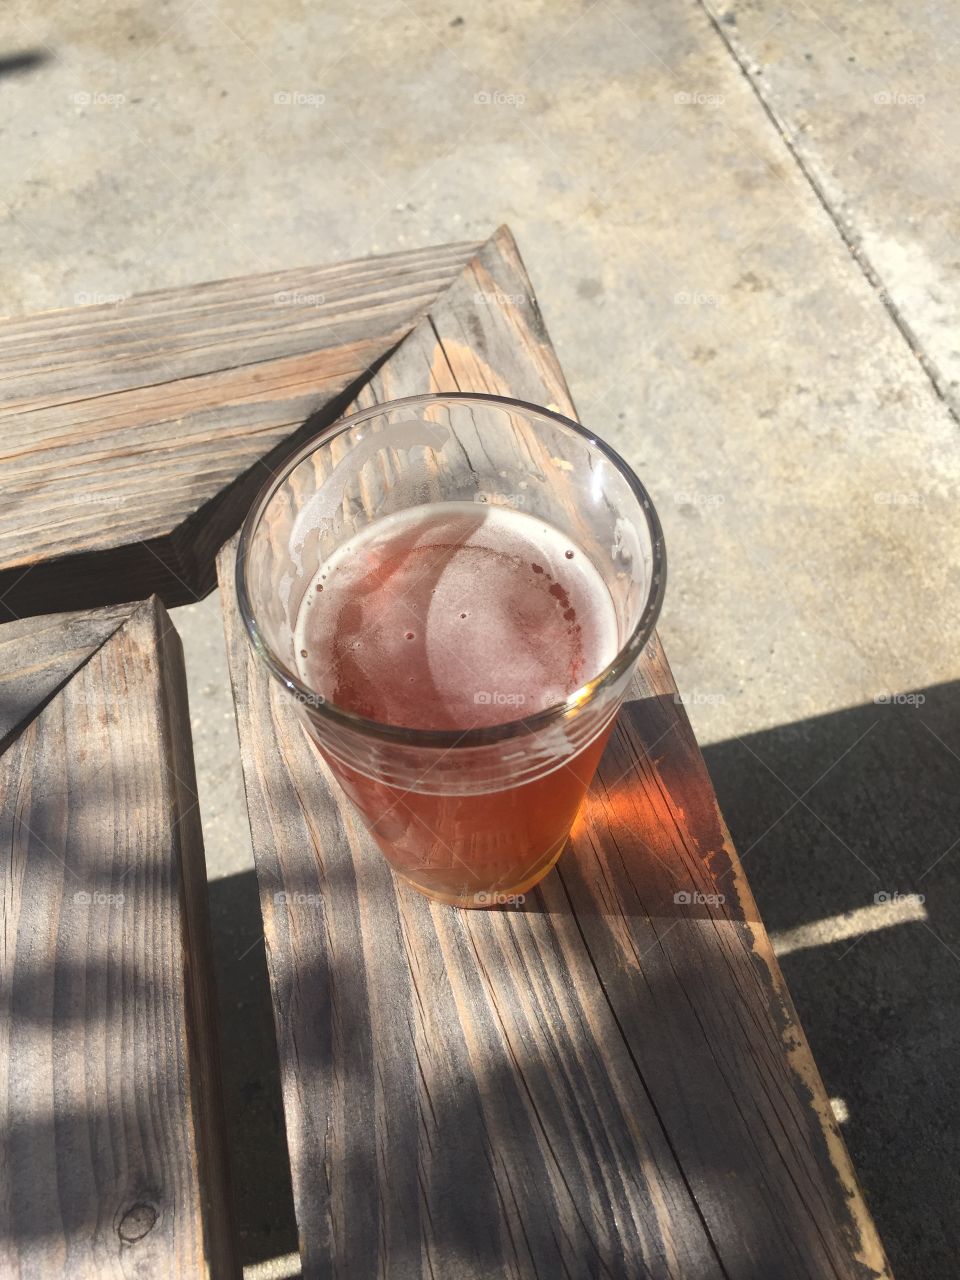 IPA at Booze Brothers brewery in Vista